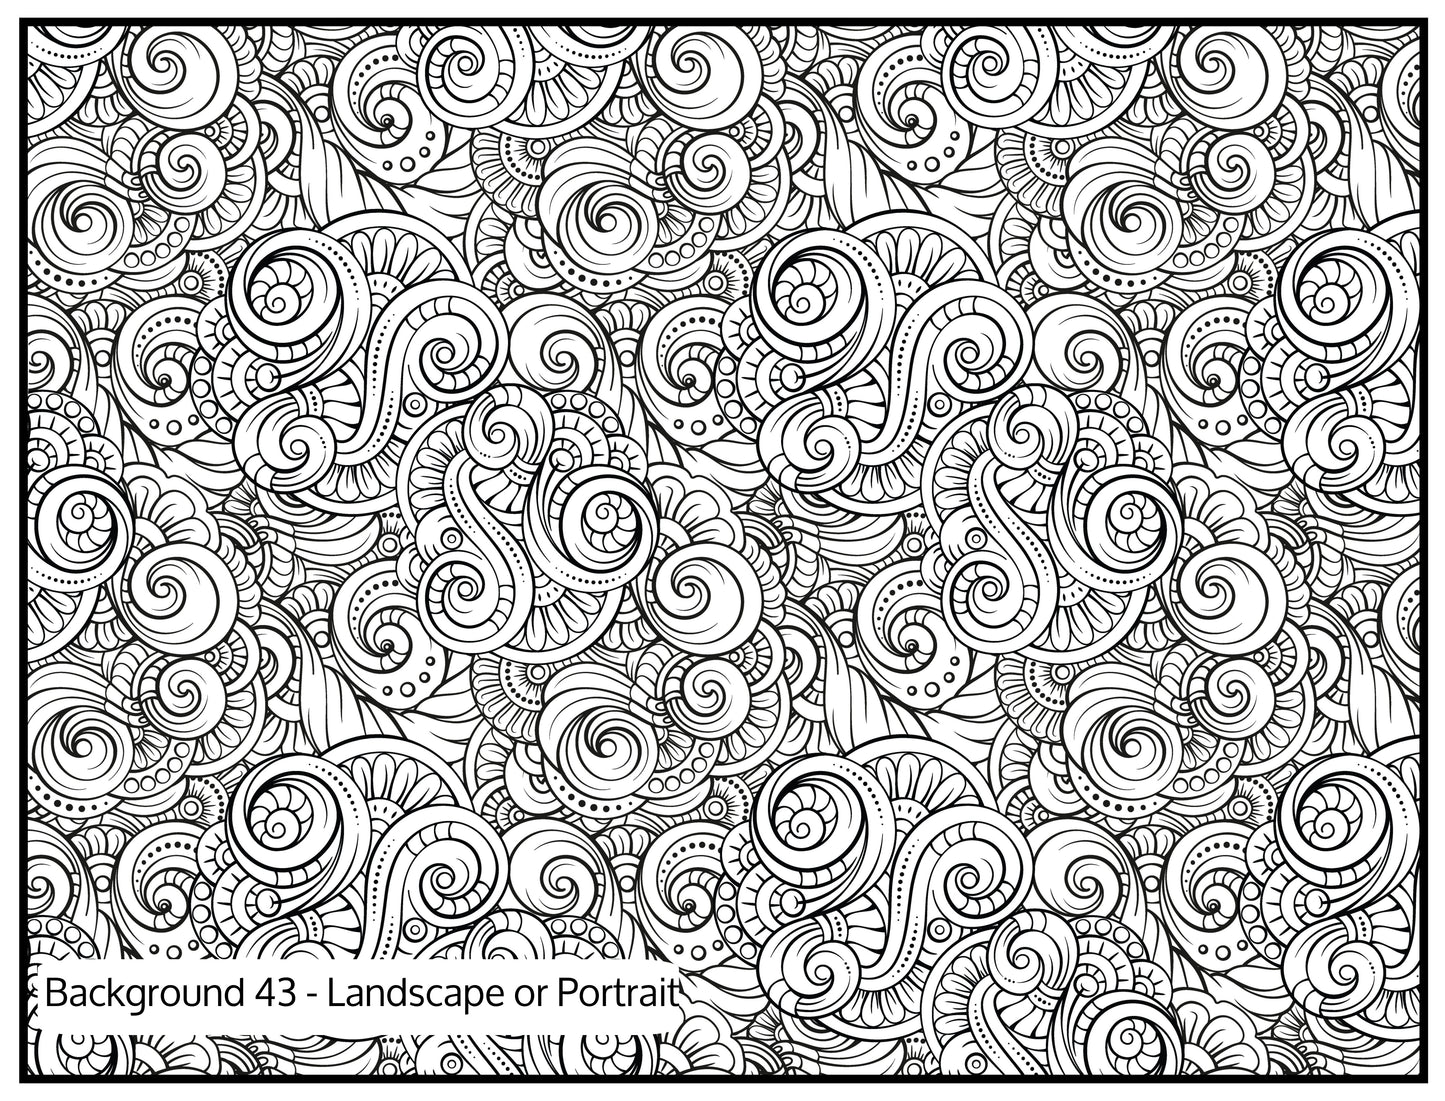 Background 43 Custom Personalized Giant Coloring Poster 46"x60"